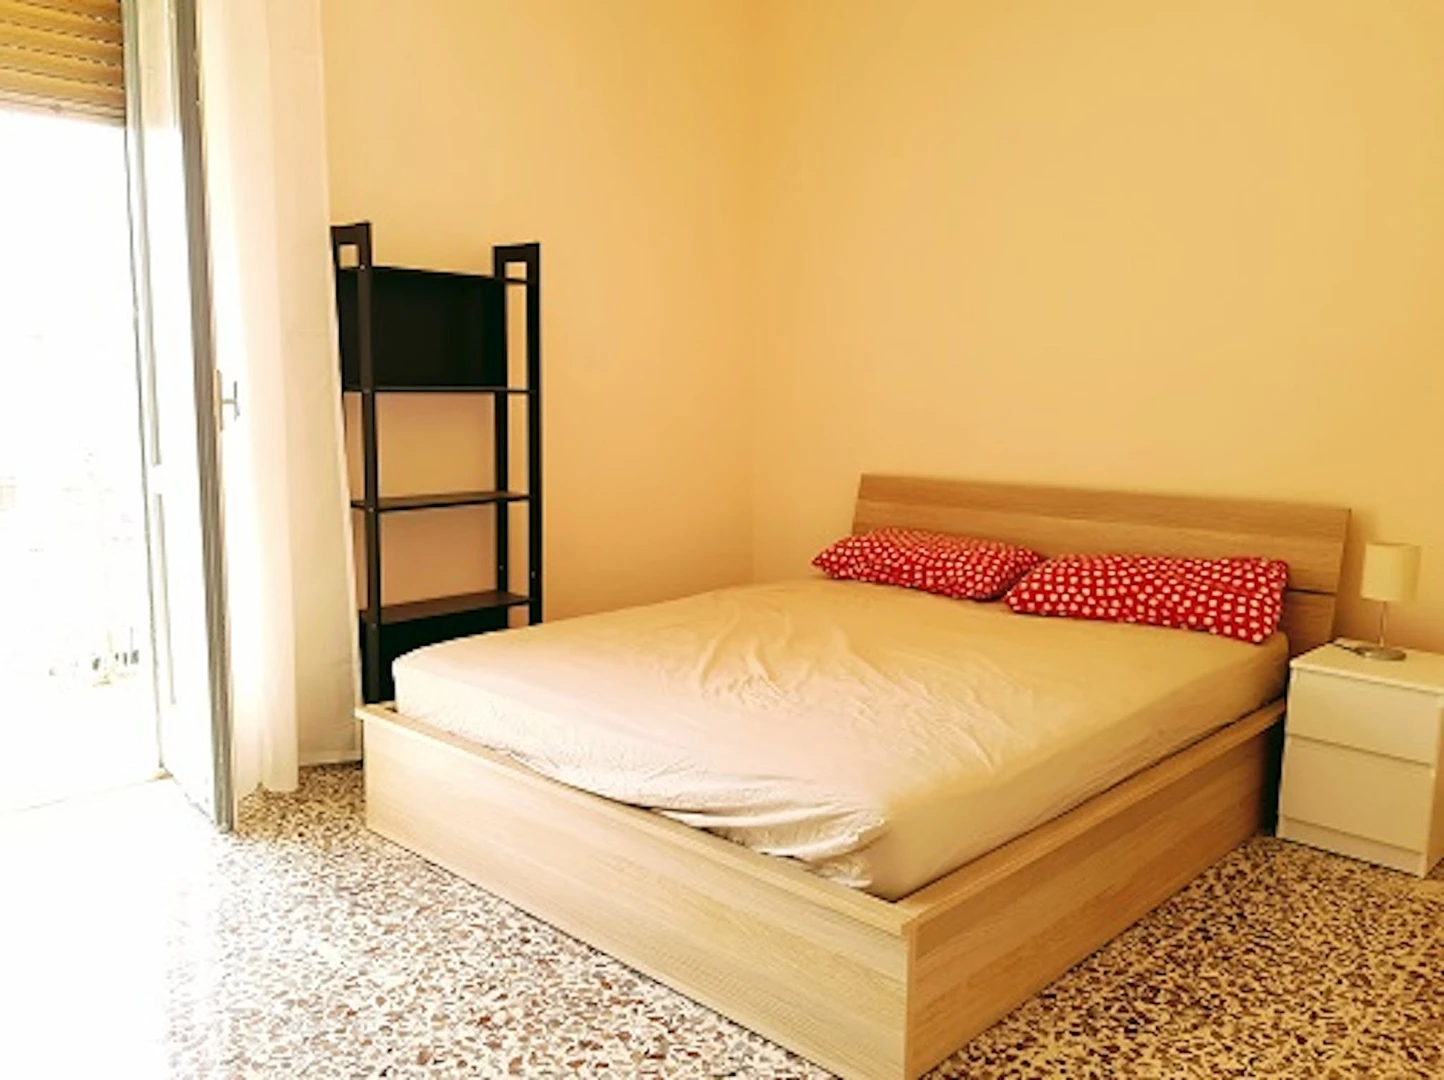 Room for rent in a shared flat in Catania